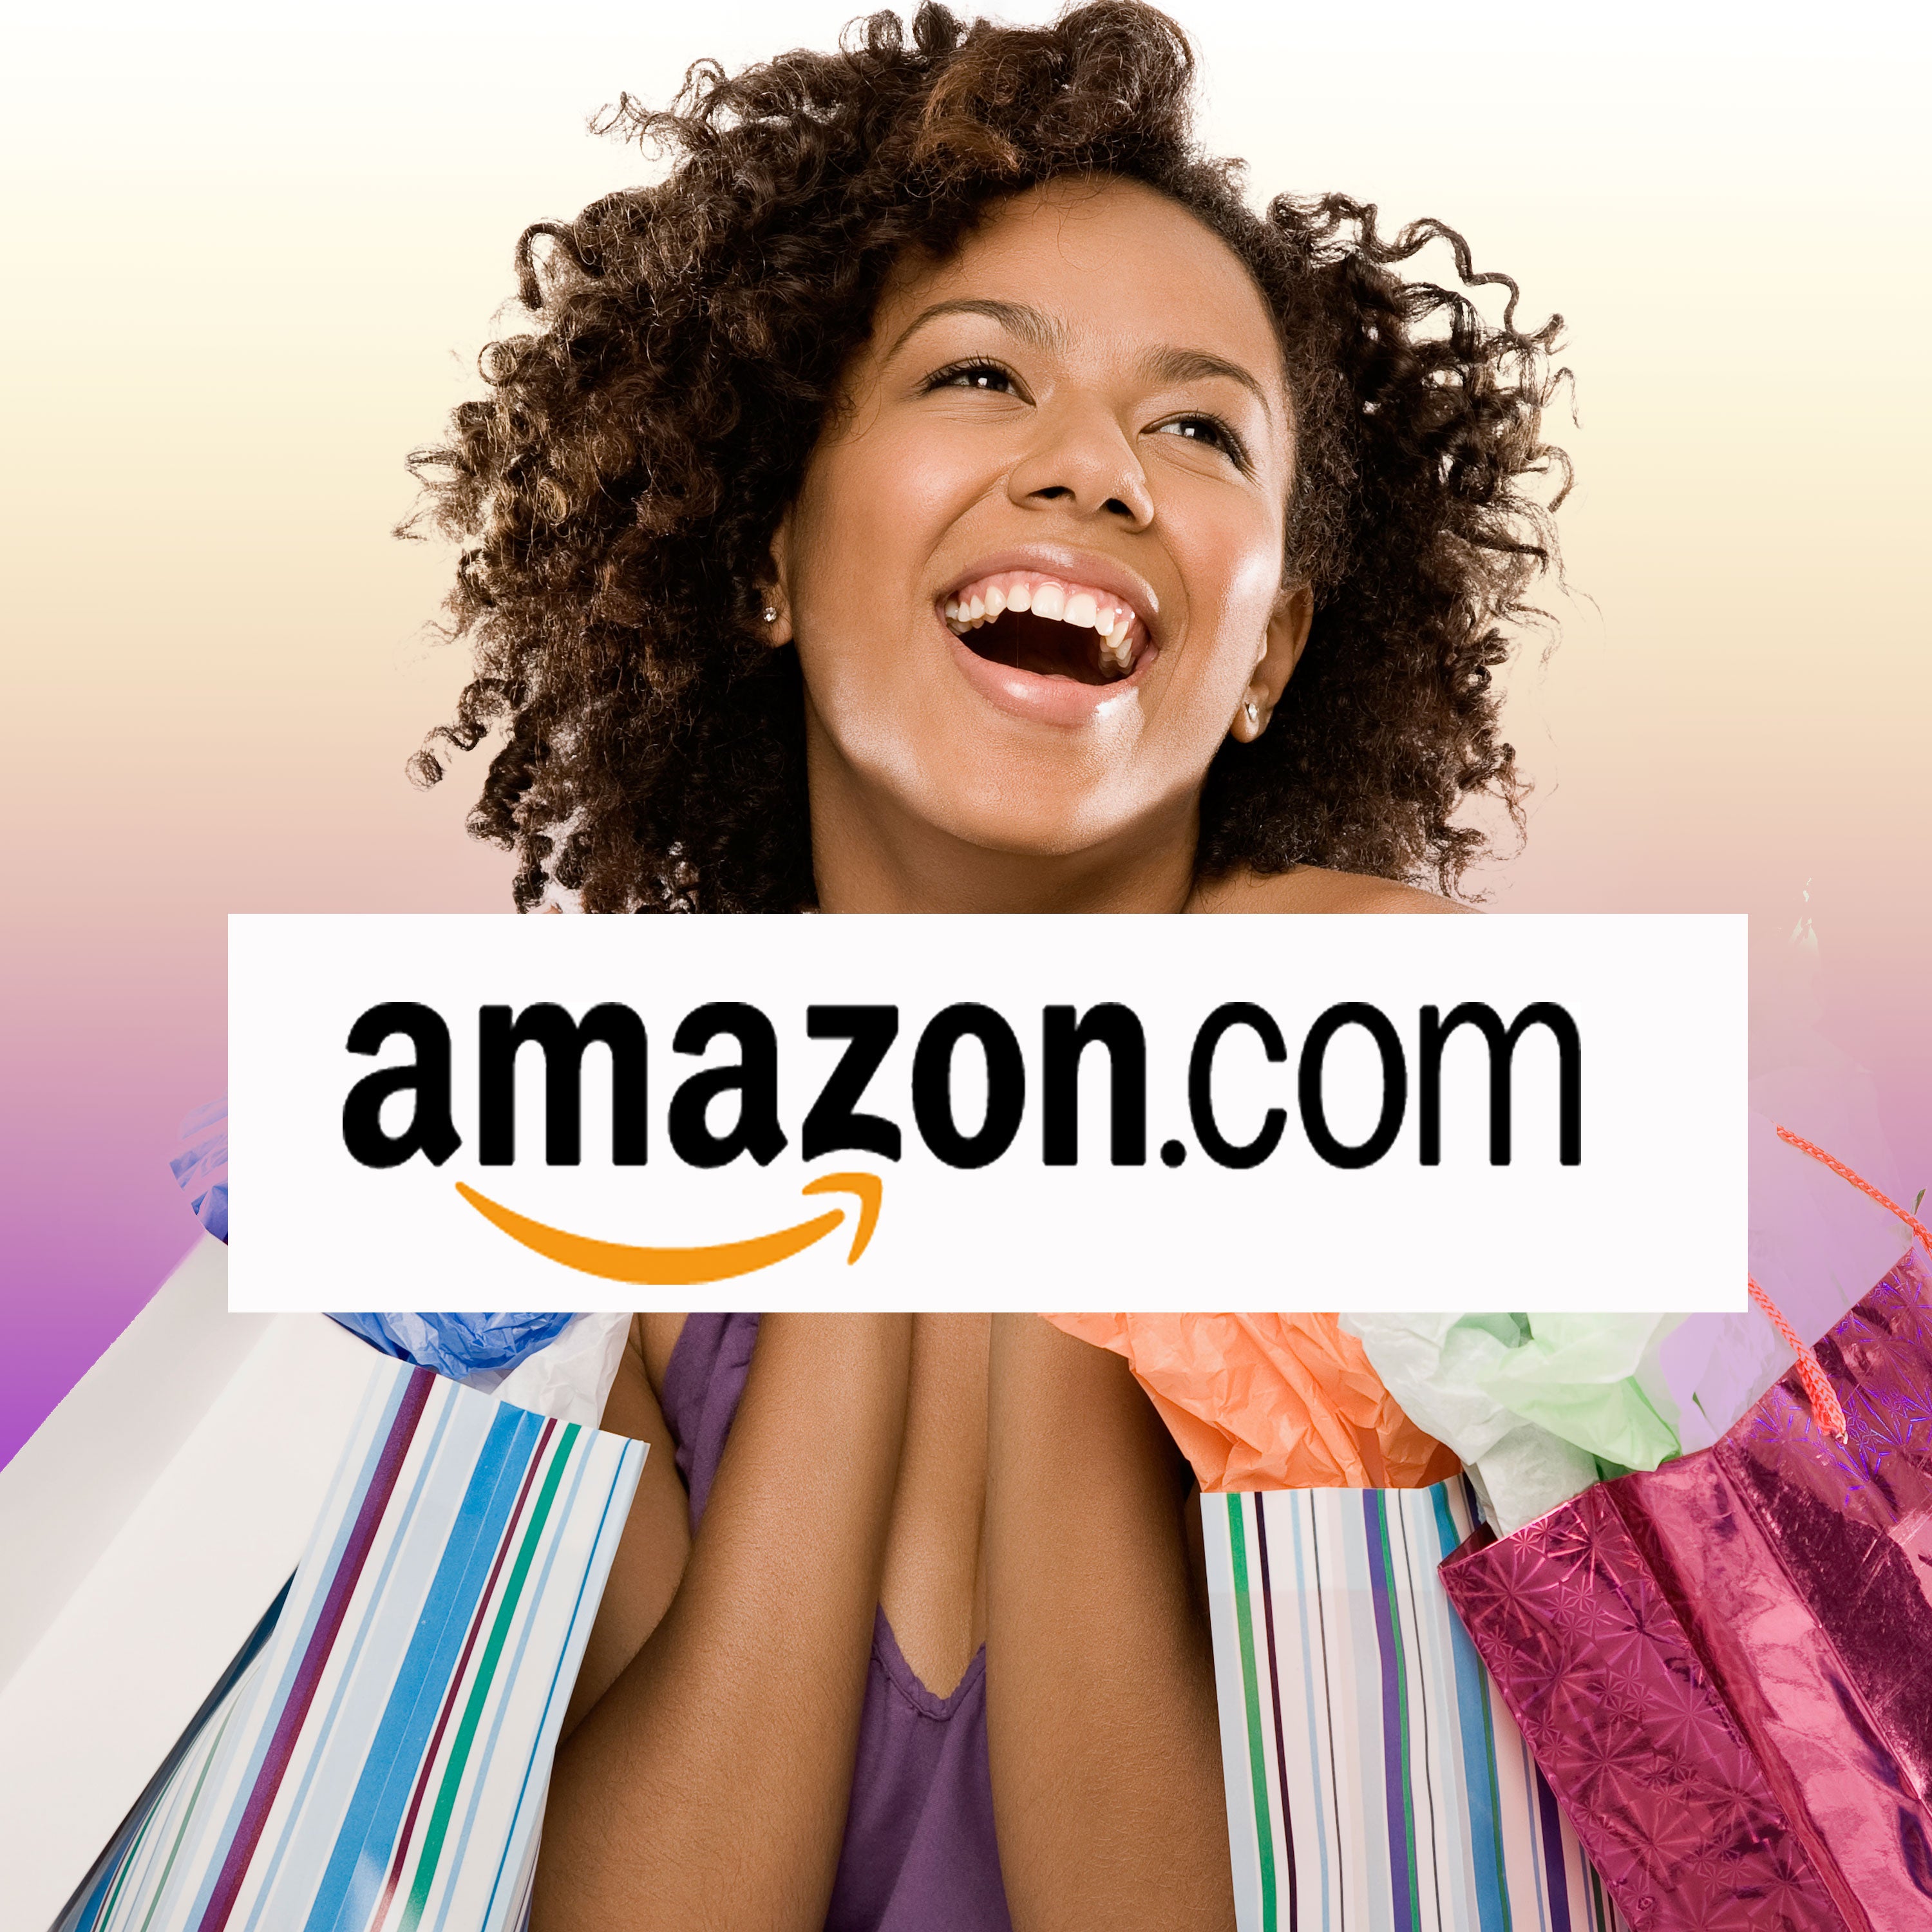 Amazon Is Offering A Discount Code To All Customers For One Day Only
